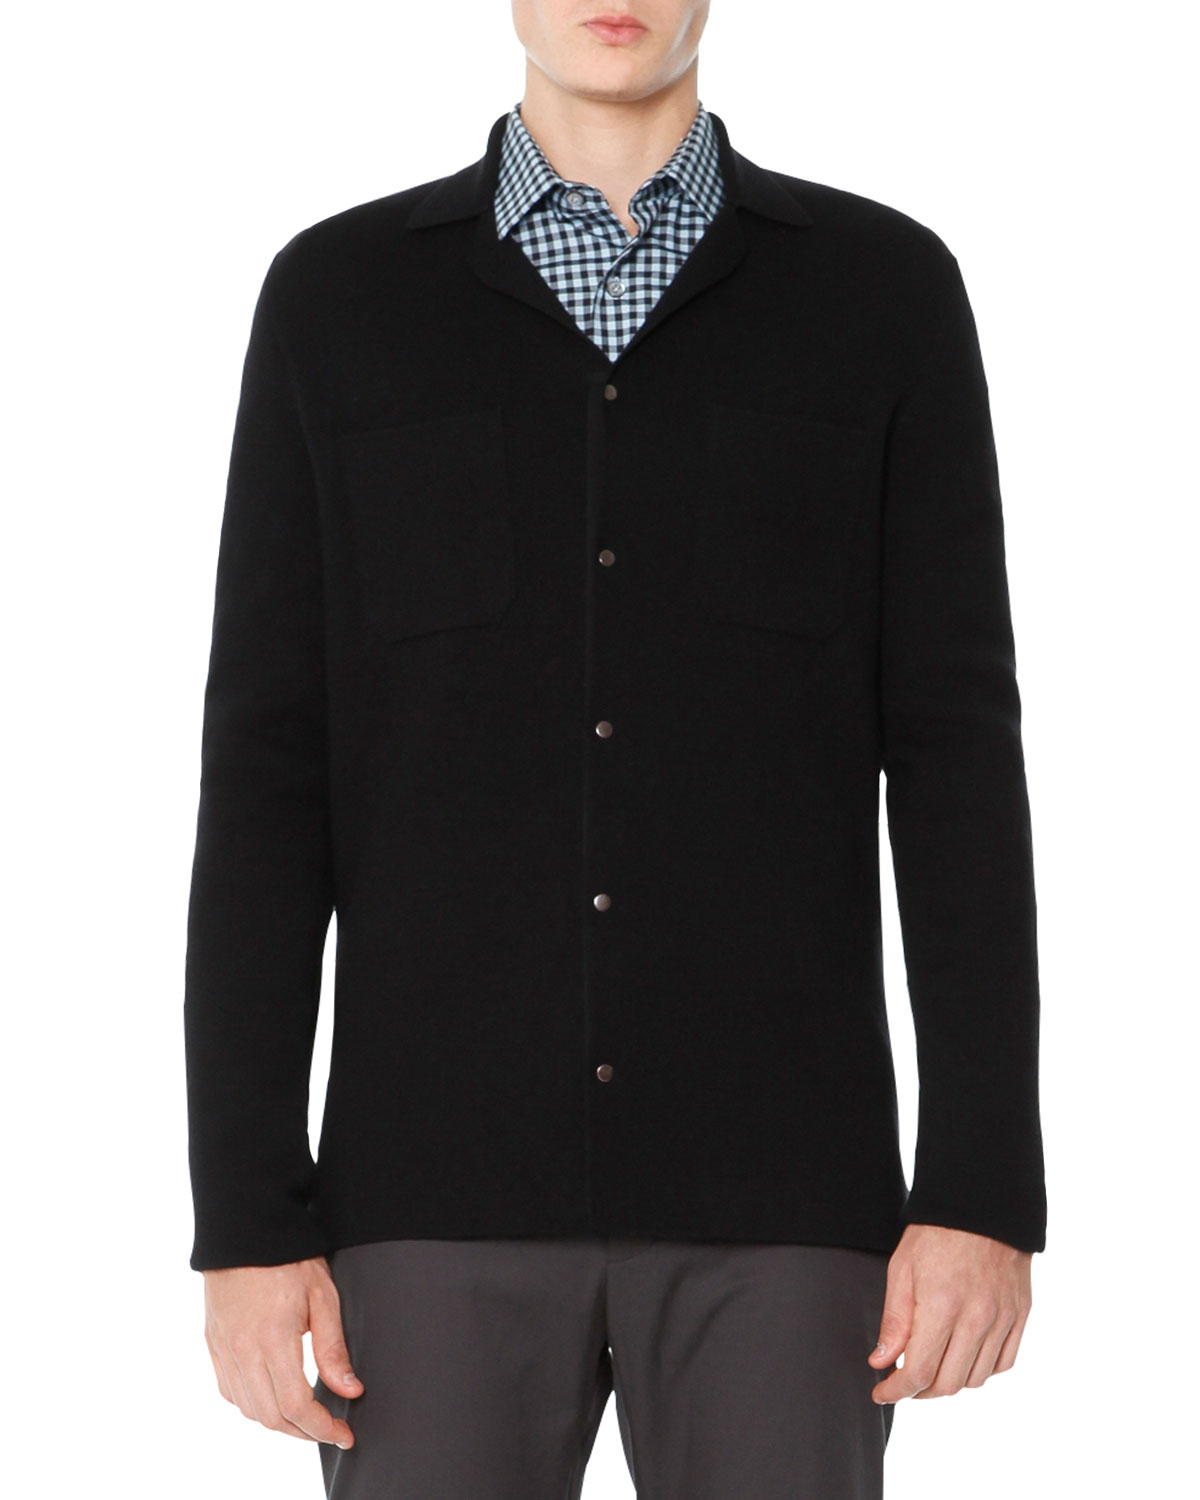 Lyst - Lanvin Snap-front Cardigan Sweater in Black for Men